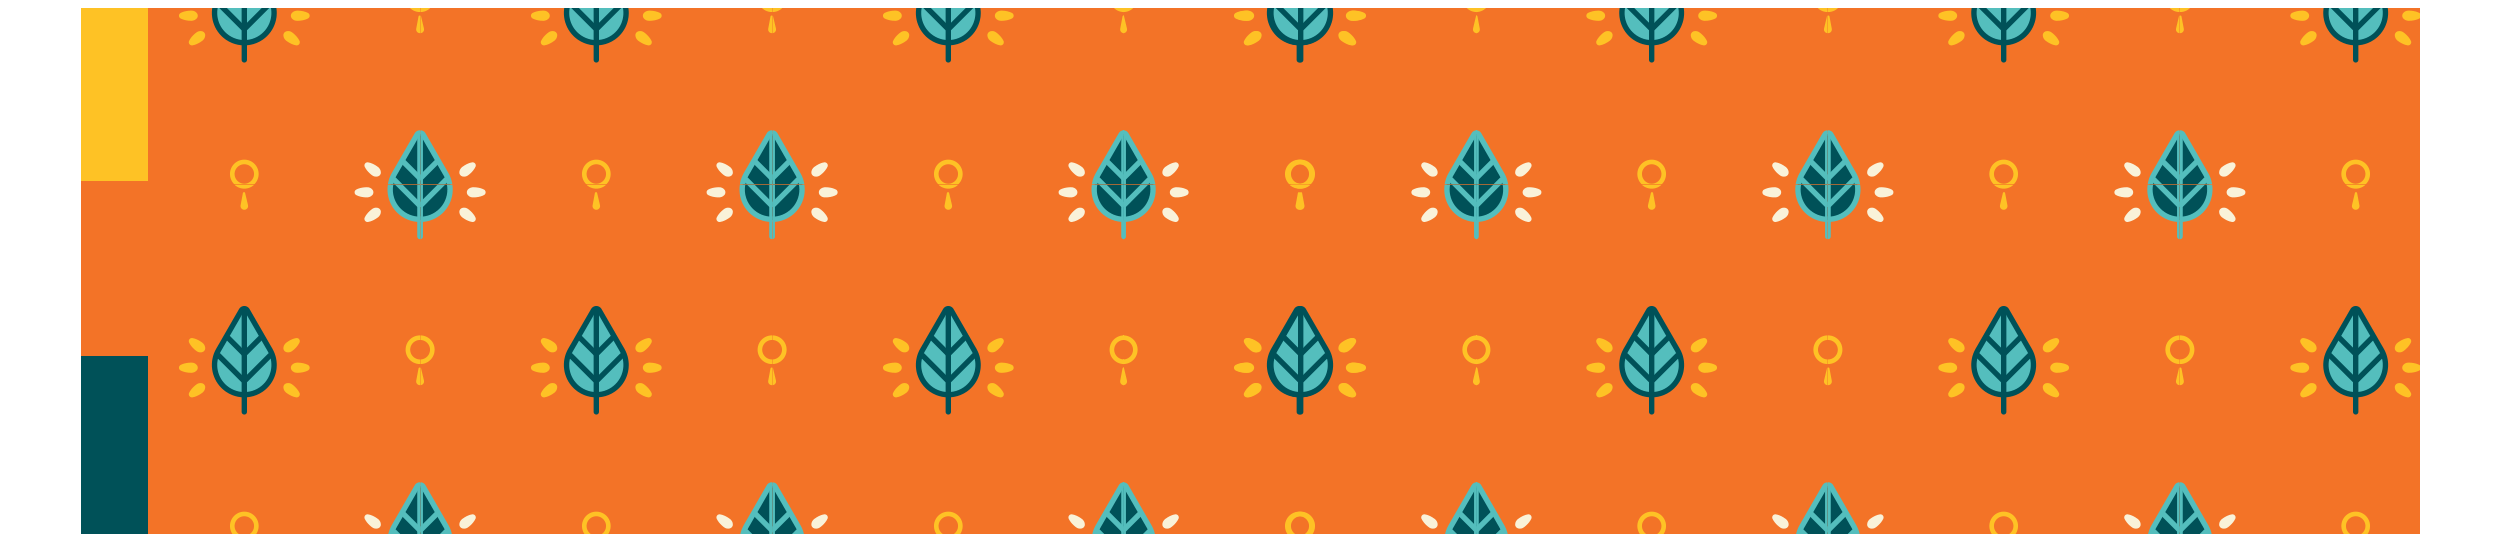 Exploration zone teal pattern leaf icons